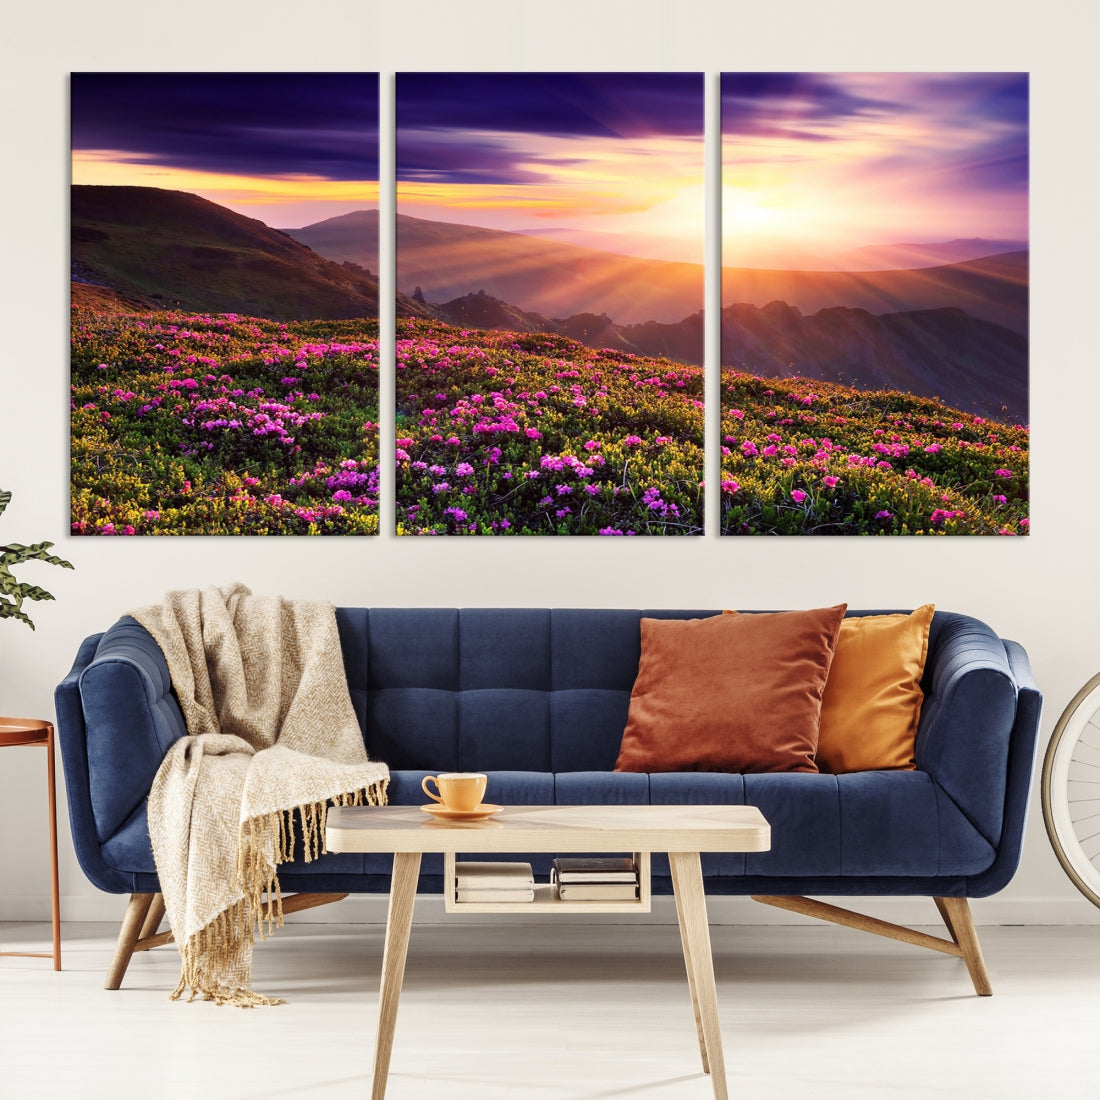 Alluring Spring Mountain with Flowers Sunset Landscape Canvas Wall Art Print